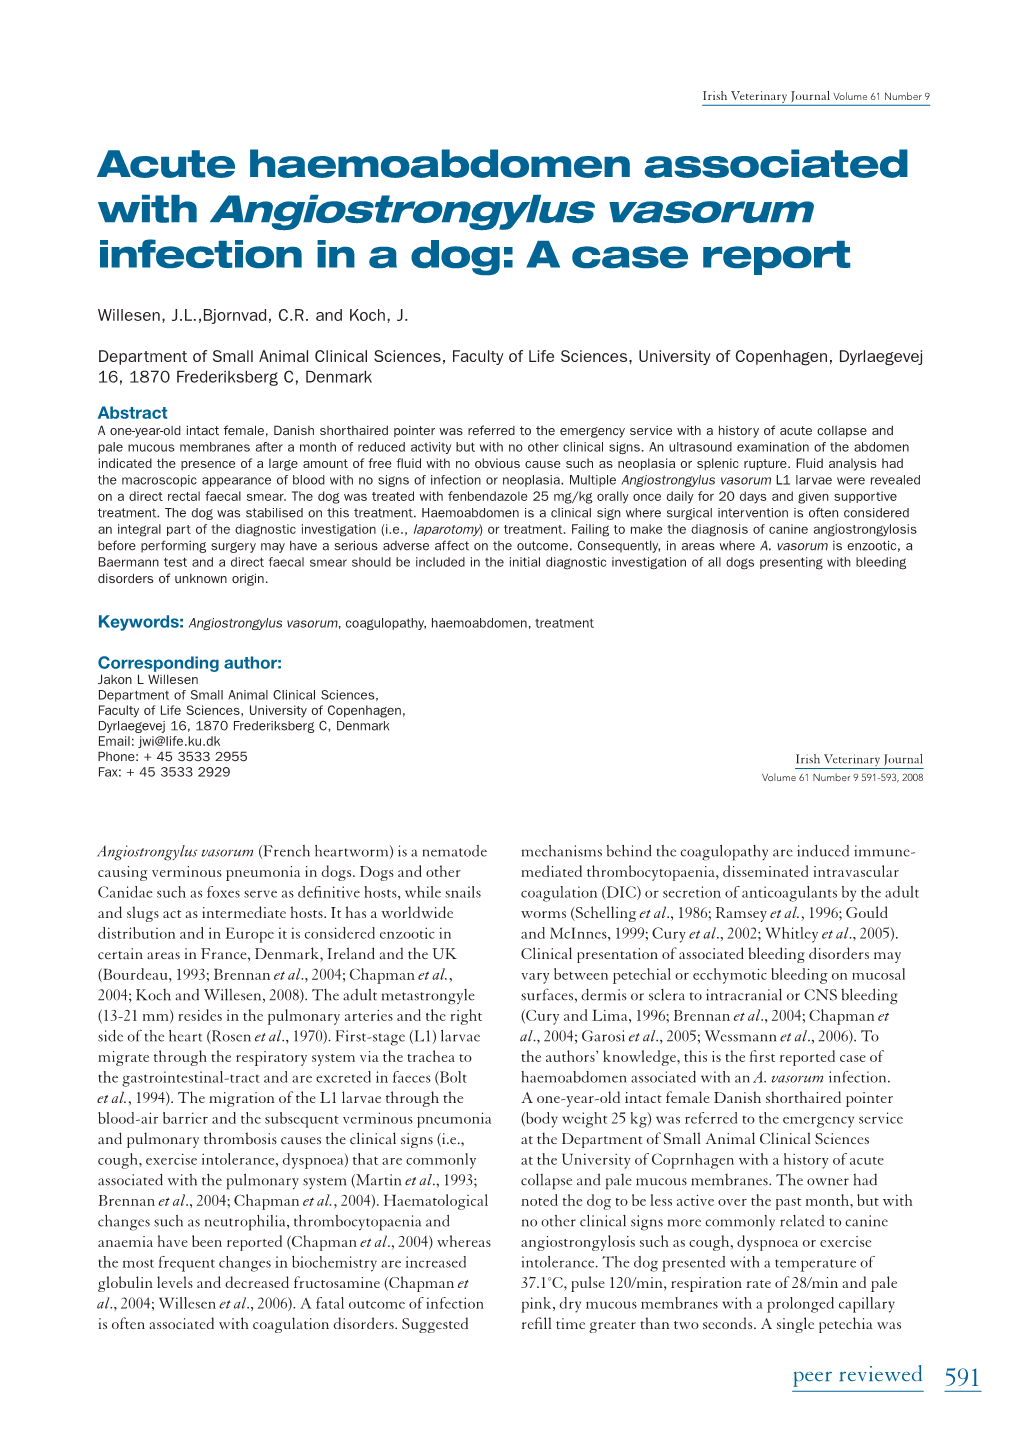 With Angiostrongylus Vasorum Infection in a Dog: a Case Report